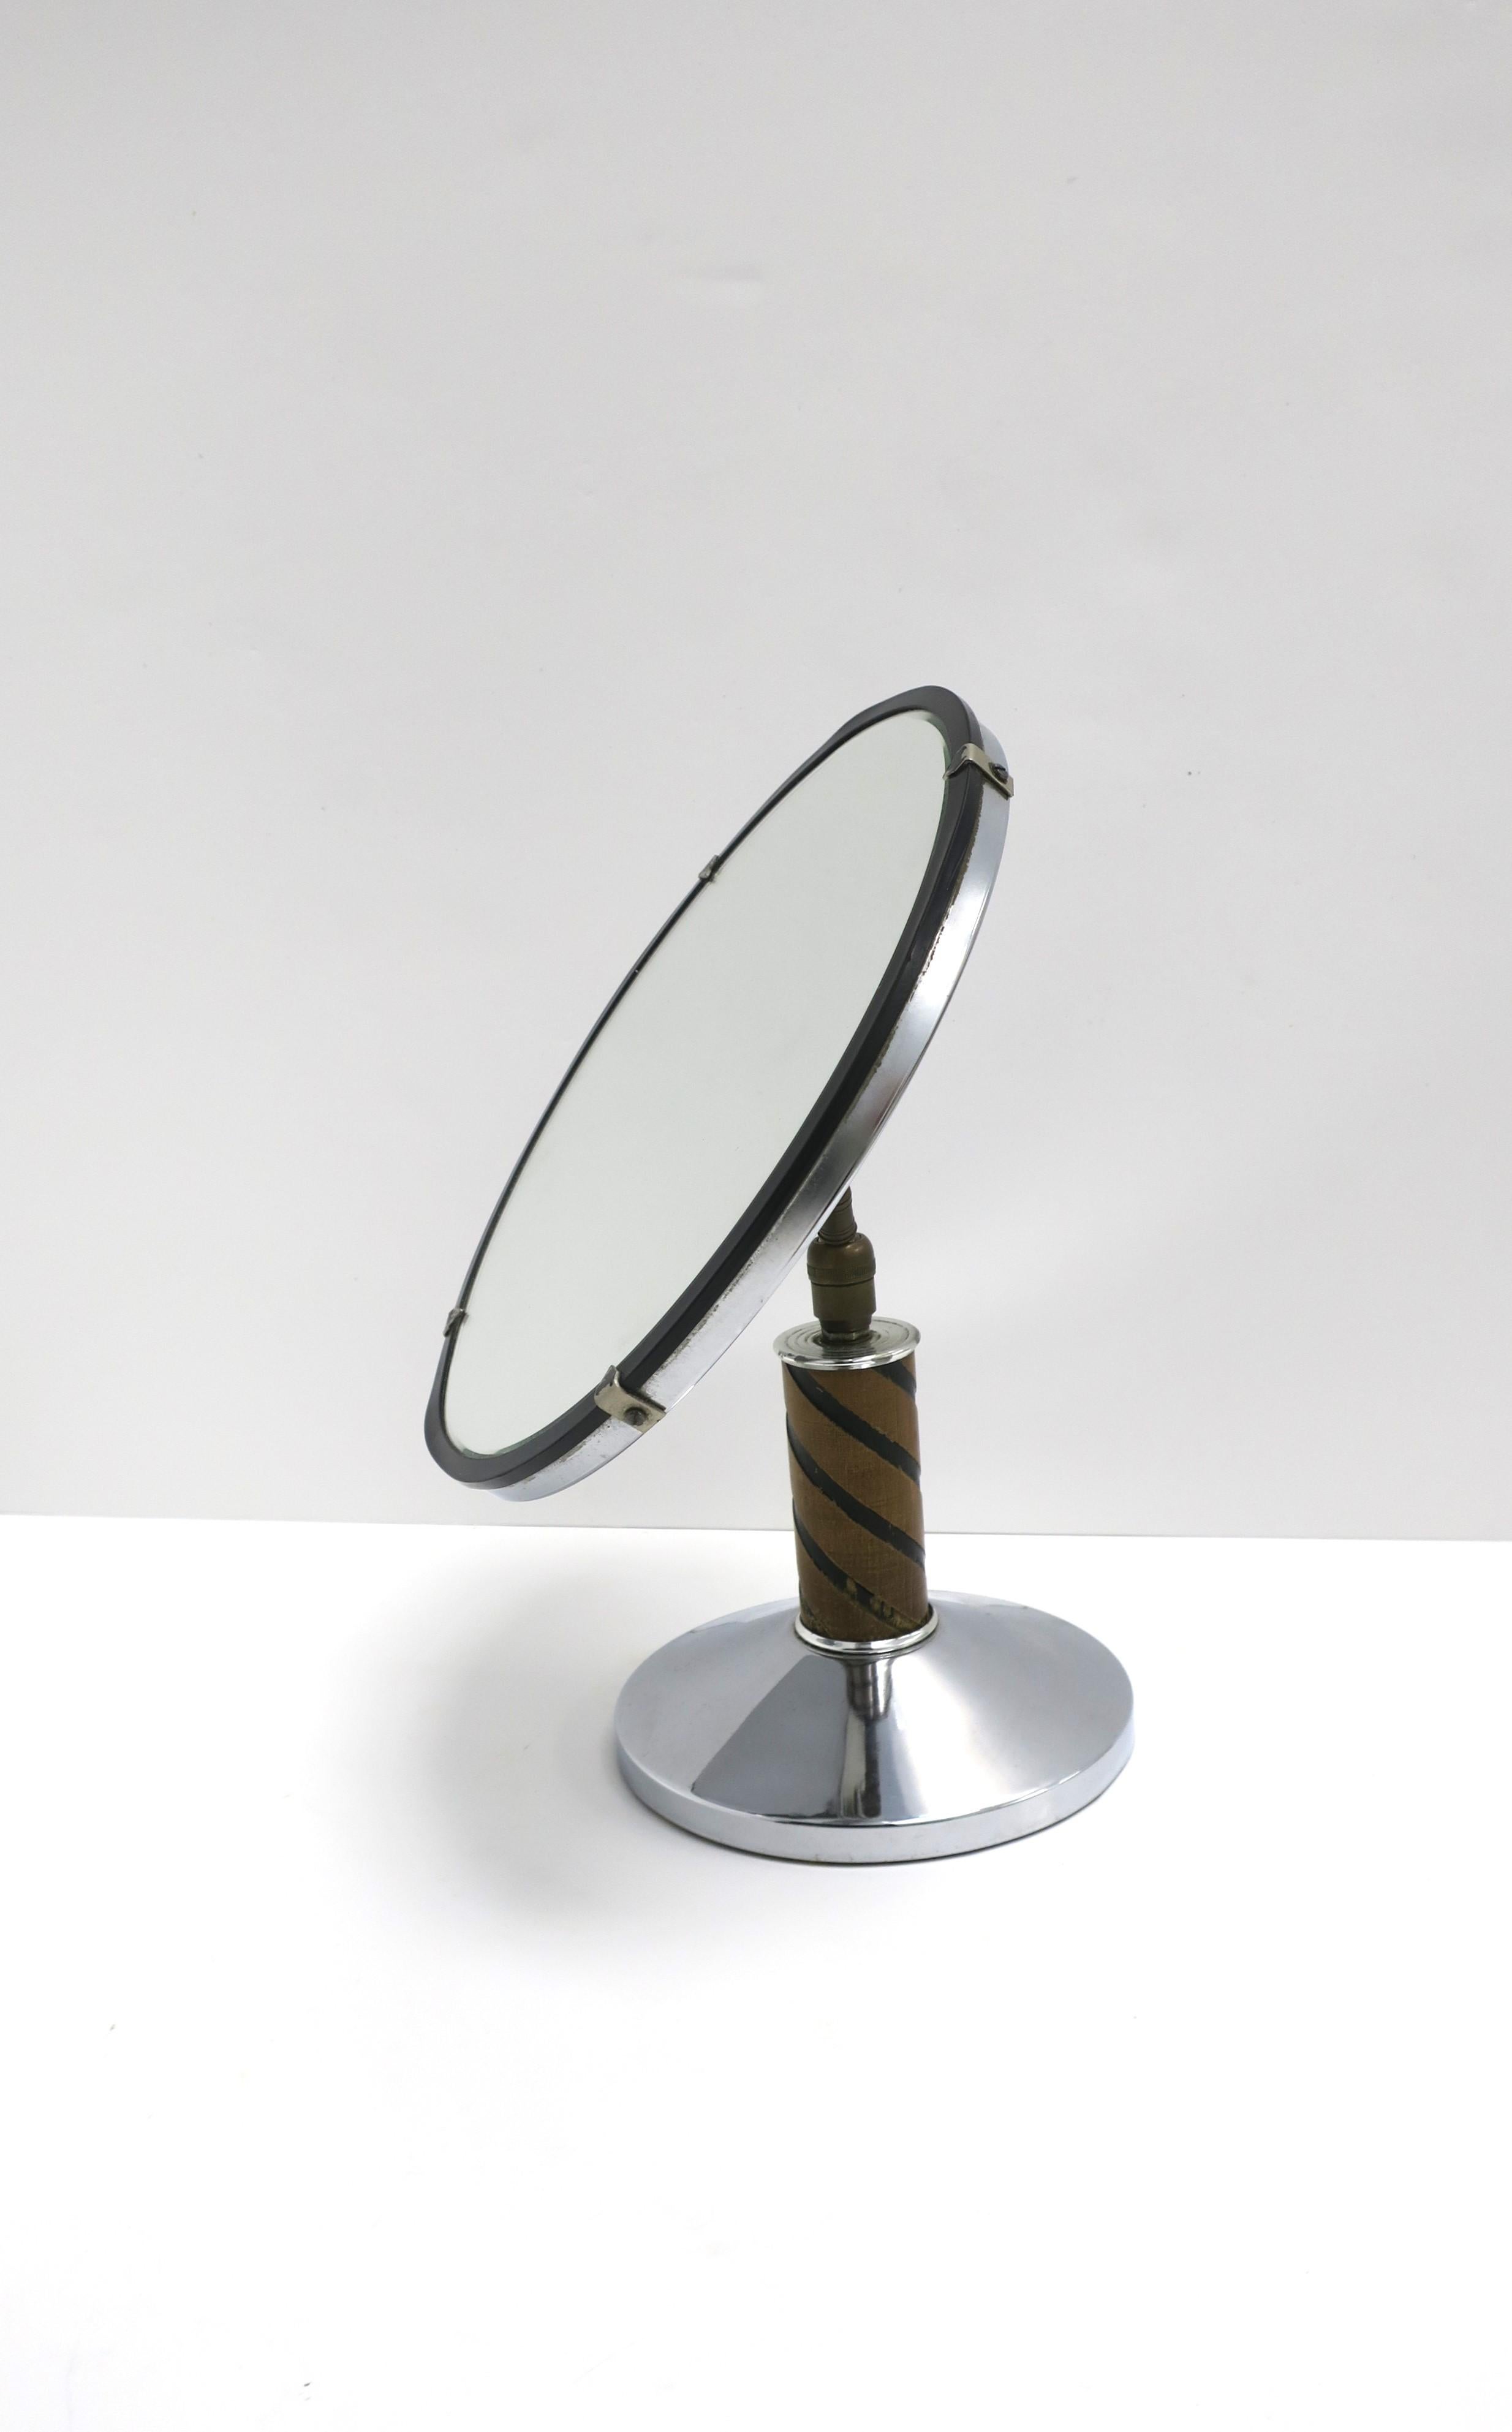 A chrome and wood Art Deco period table vanity mirror, circa early-20th century. Piece has wood and chrome metal base and frame, round mirror, and bronze hardware at back. Mirror is adjustable as shown (up, down, left, right.)

Dimensions: